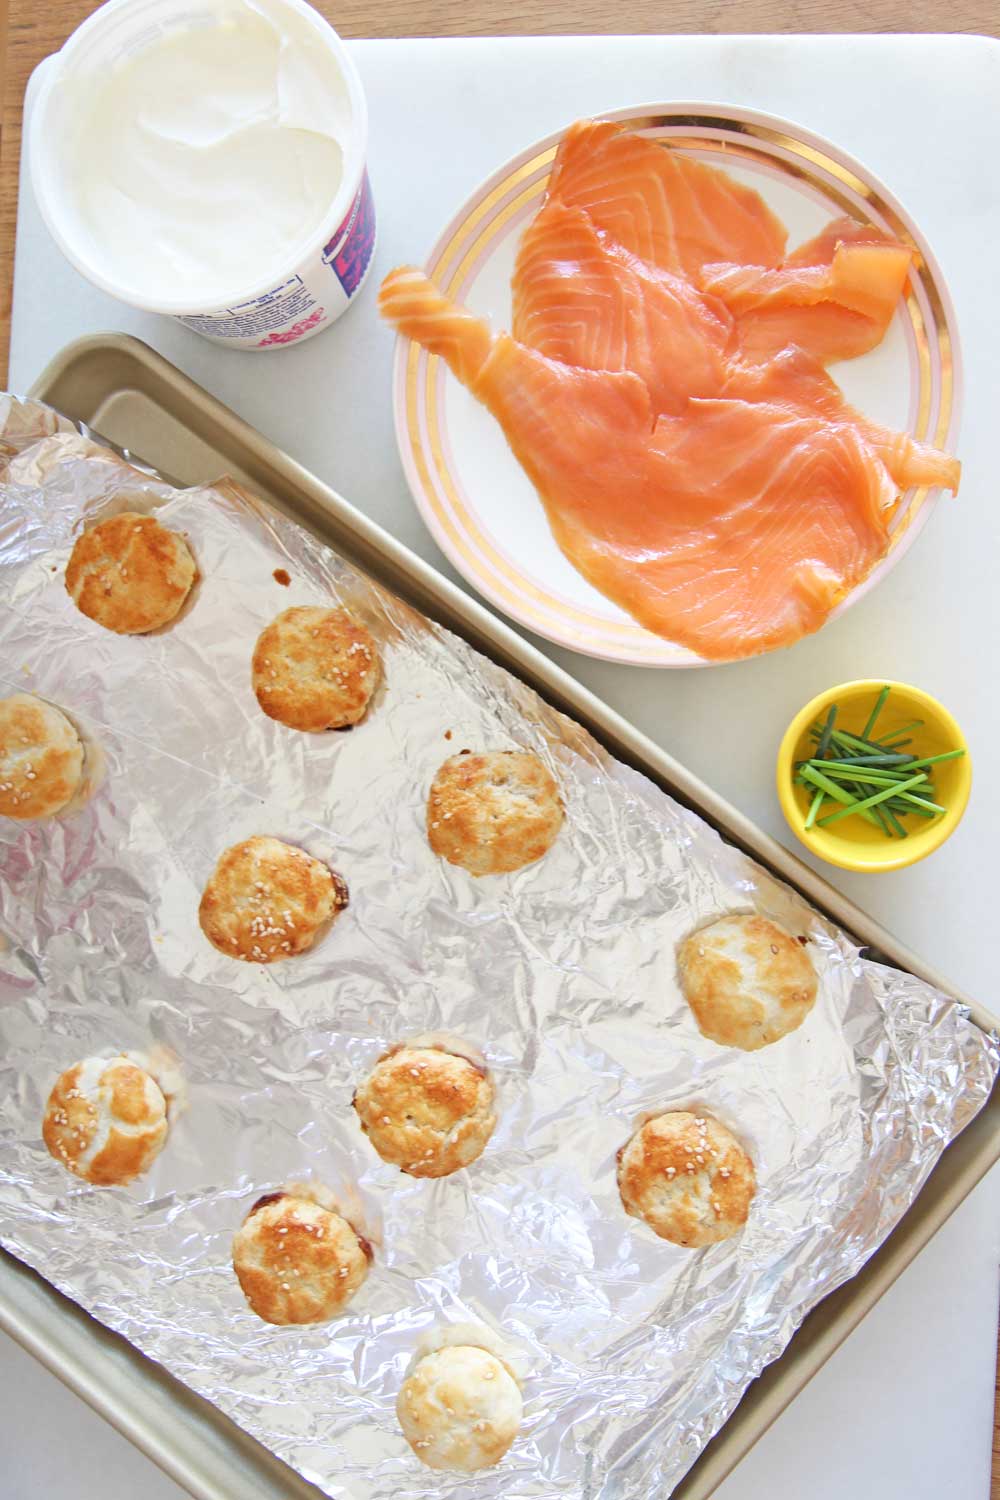 Lox and Potato Knish Recipe. This is potato knish, lox, sour cream, and chives. This is the perfect New Years appetizer, Holiday appetizer, or game night eats. This is super easy. Happy Cooking! www.ChopHappy.com